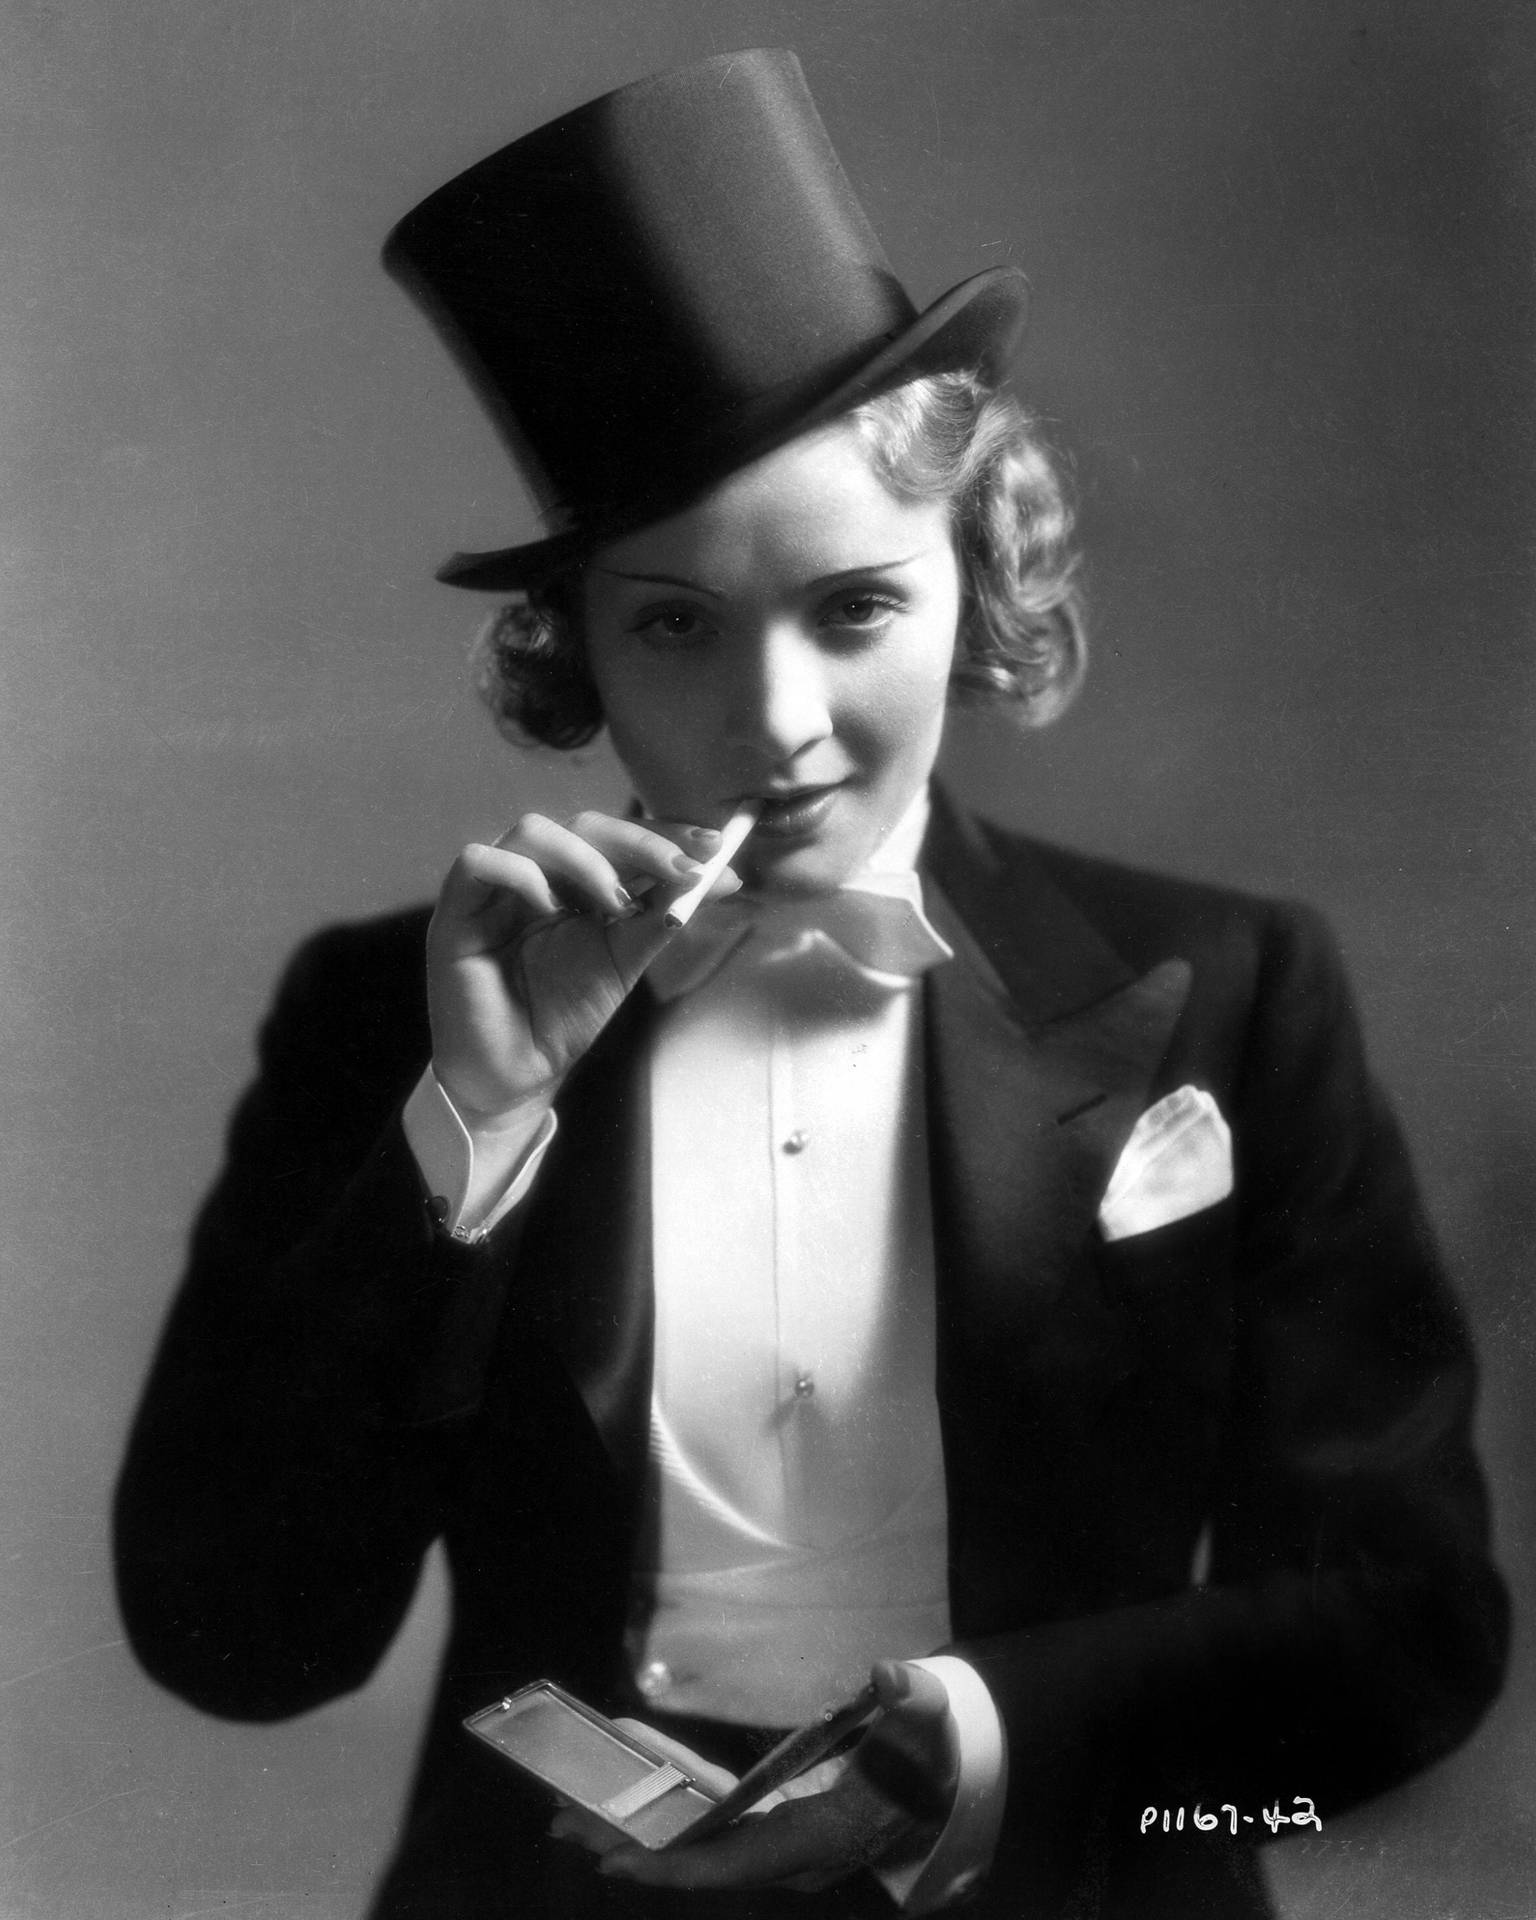 "Elegant Marlene Dietrich in a Classic Suit and Top Hat" Wallpaper